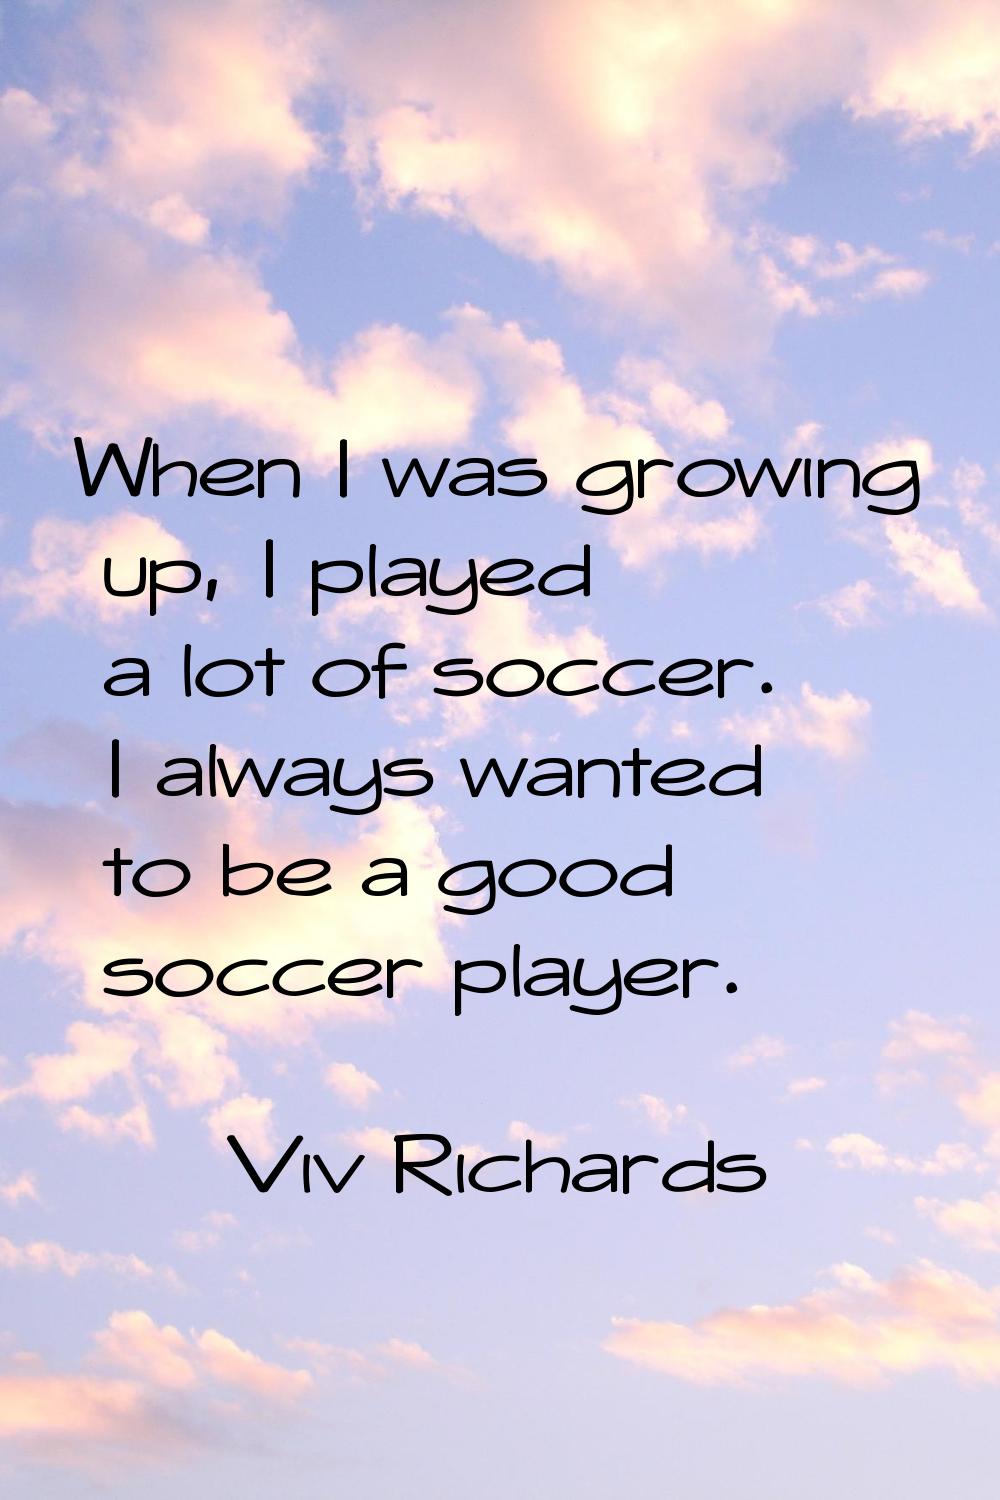 When I was growing up, I played a lot of soccer. I always wanted to be a good soccer player.